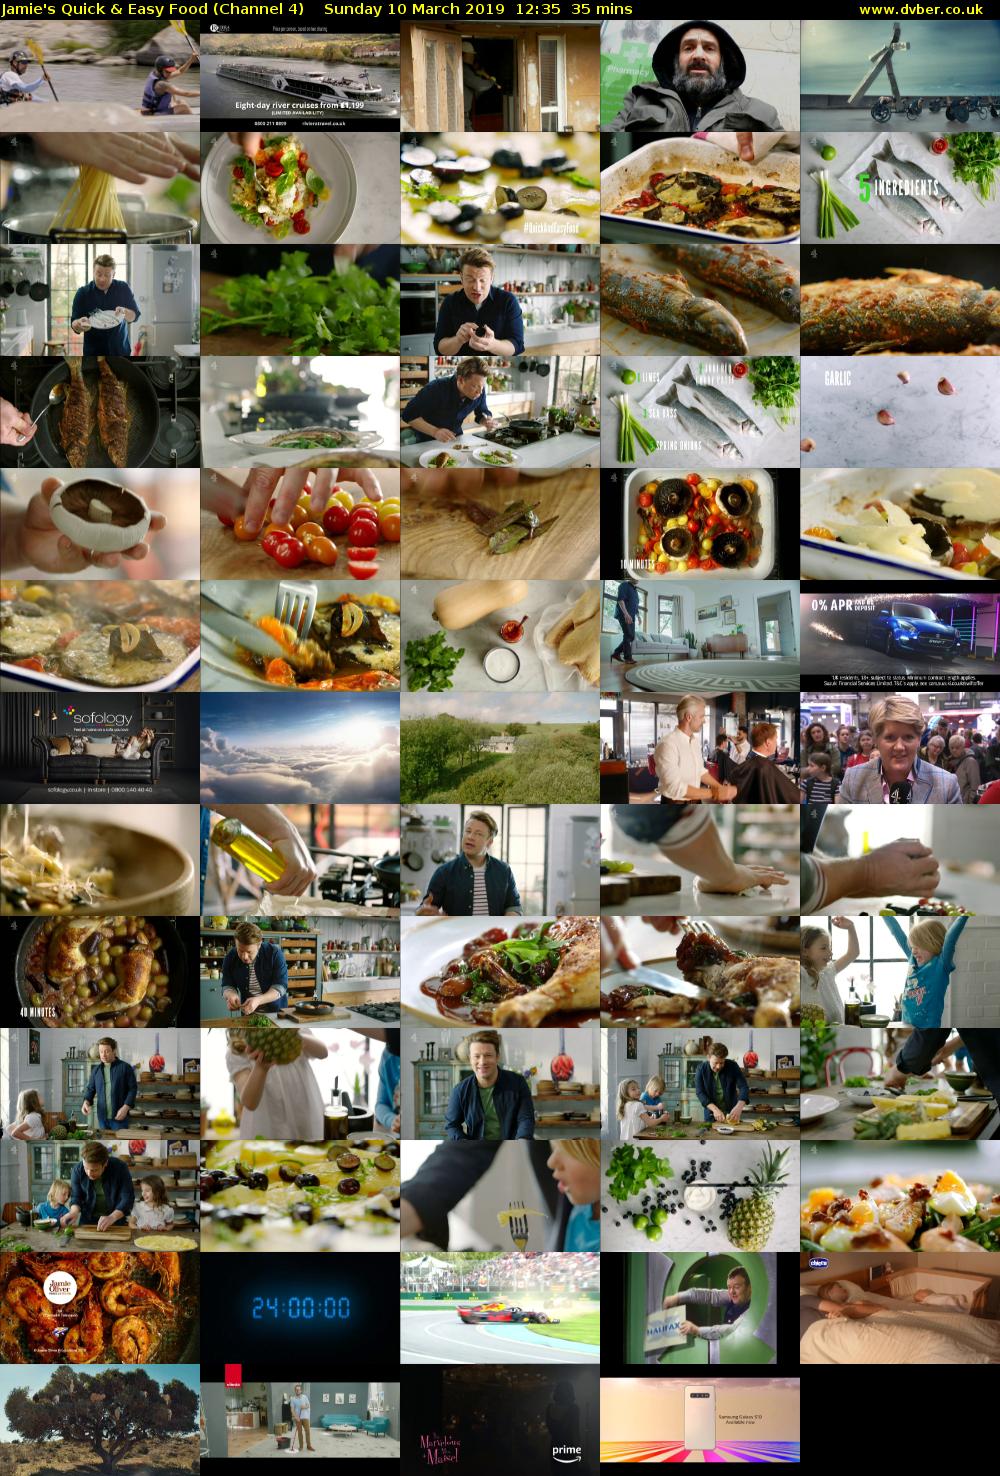 Jamie's Quick & Easy Food (Channel 4) Sunday 10 March 2019 12:35 - 13:10